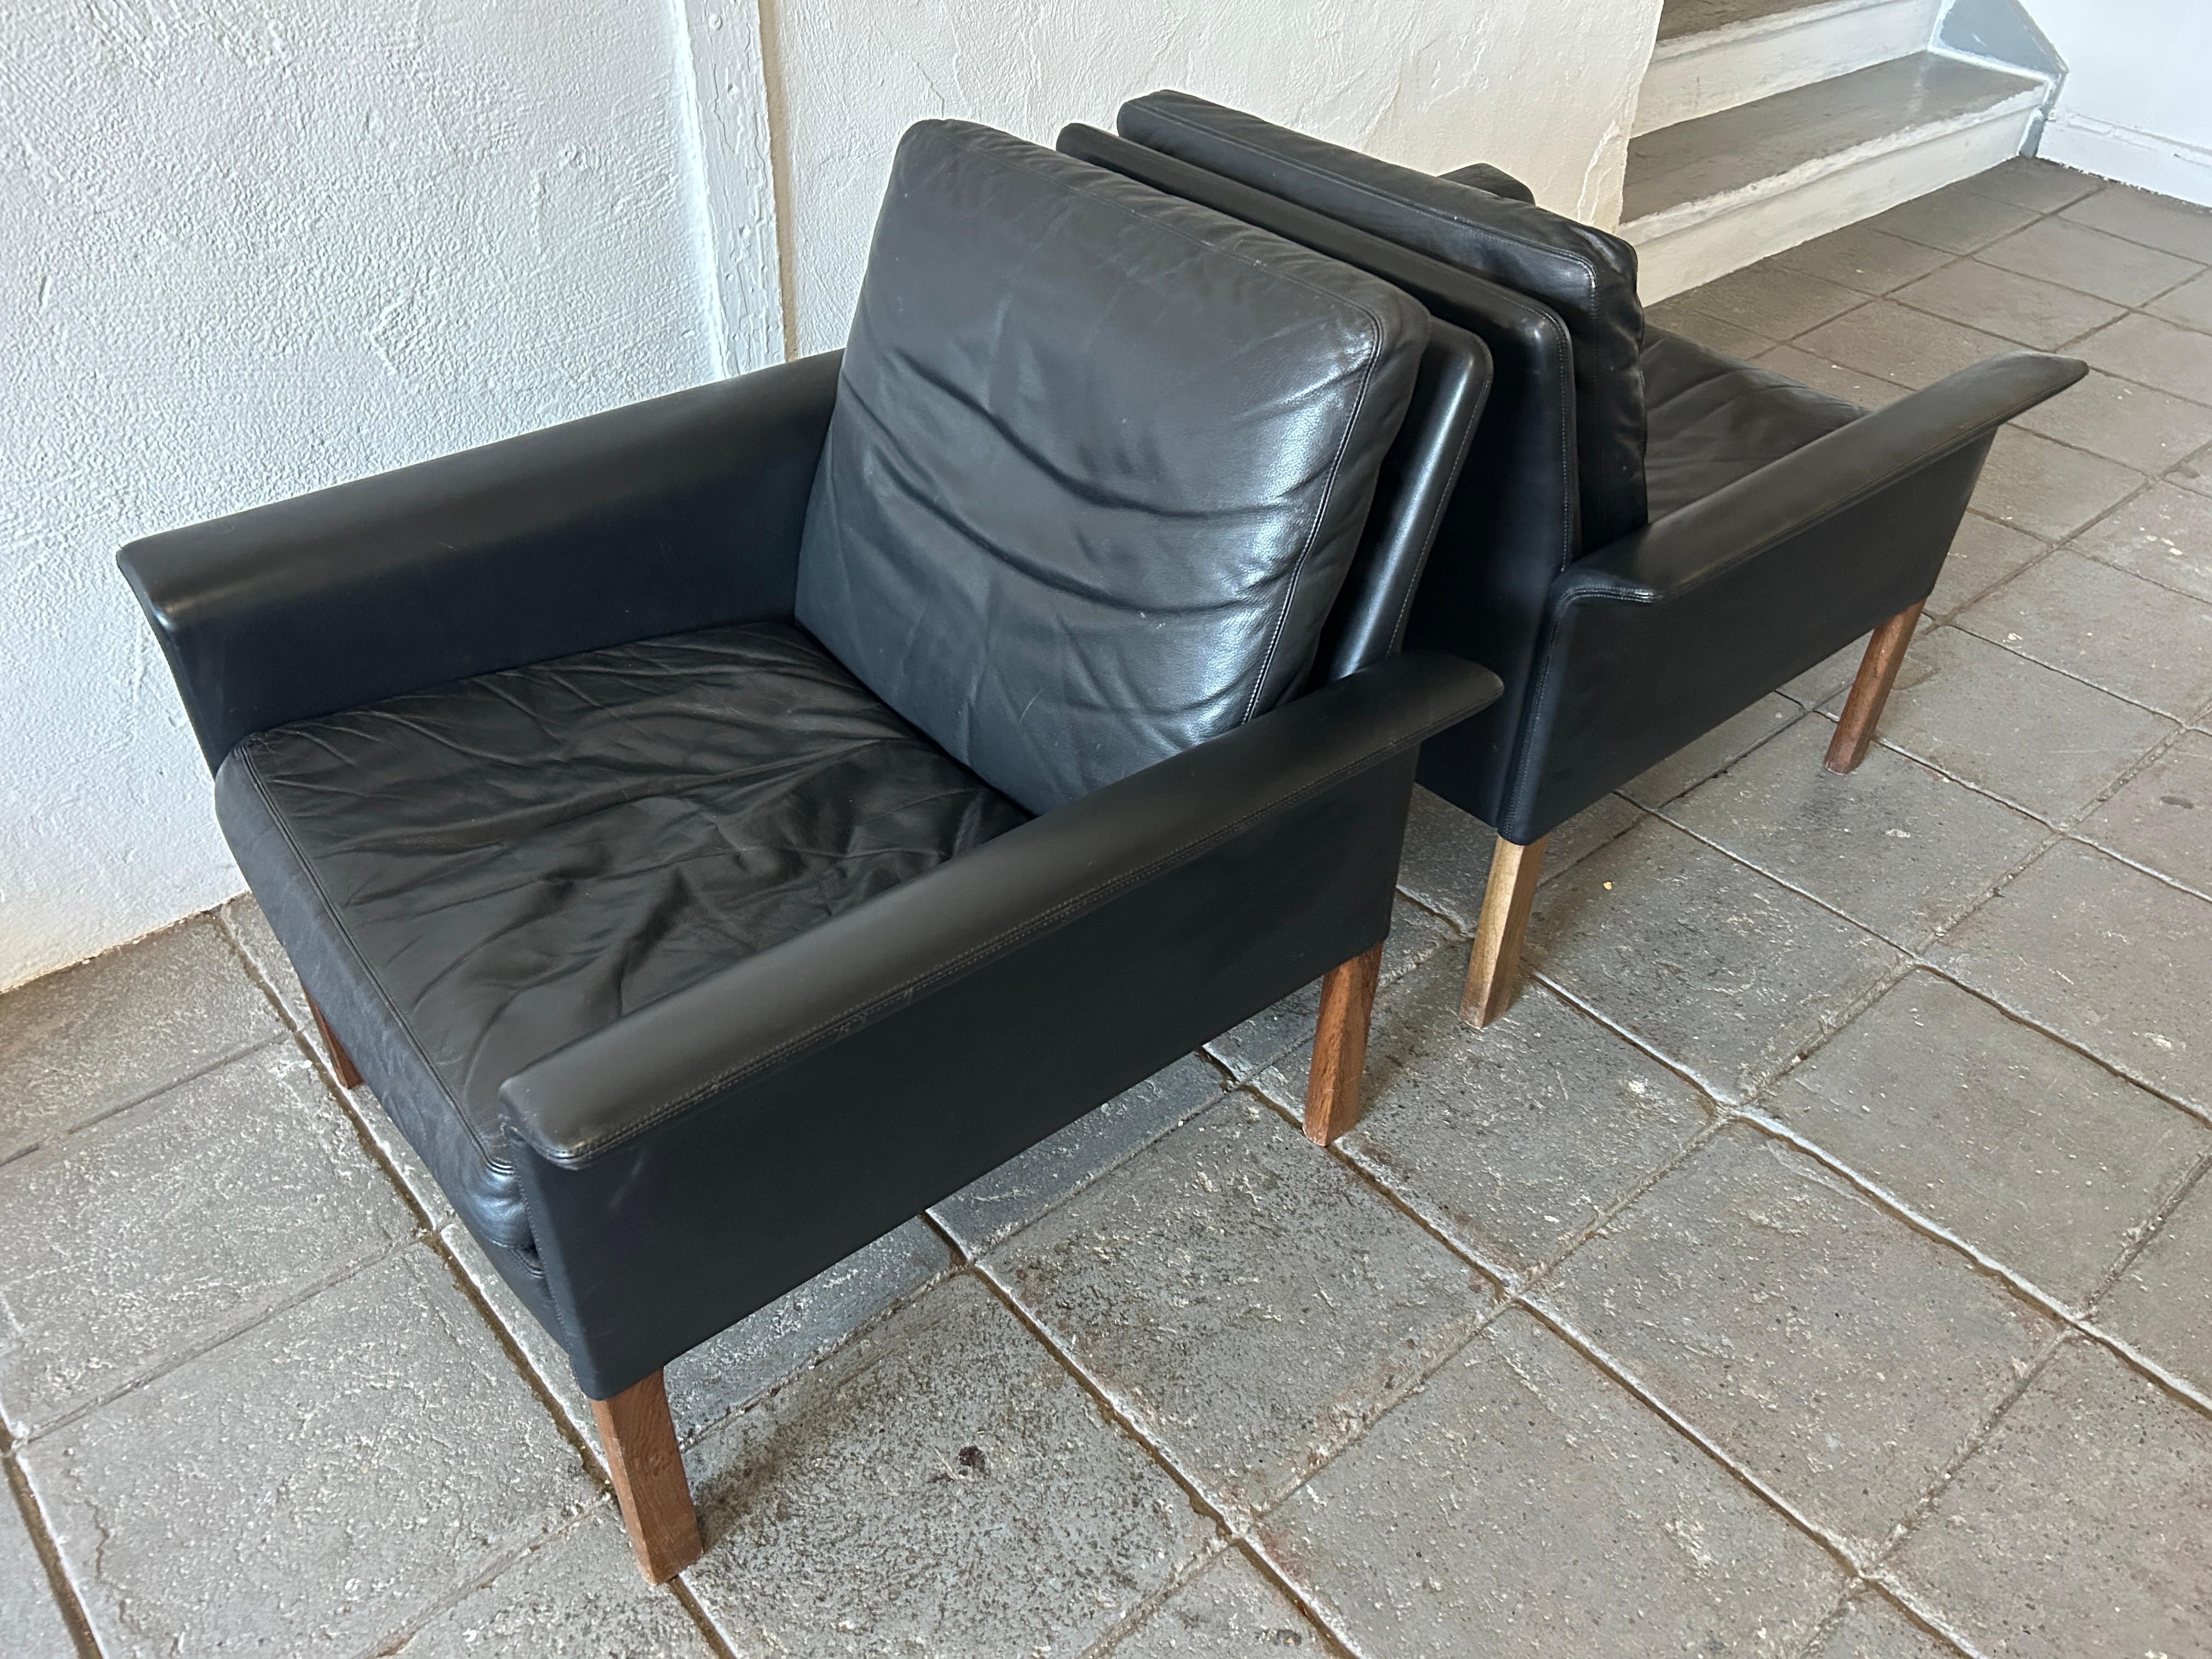 Pair of Mid-Century Modern black leather and rosewood model 500 lounge chairs by Hans Olsen for CS Møbler Glostrup made in Denmark. Constructed of solid Brazilian rosewood and original broken in black genuine leather this modern design is